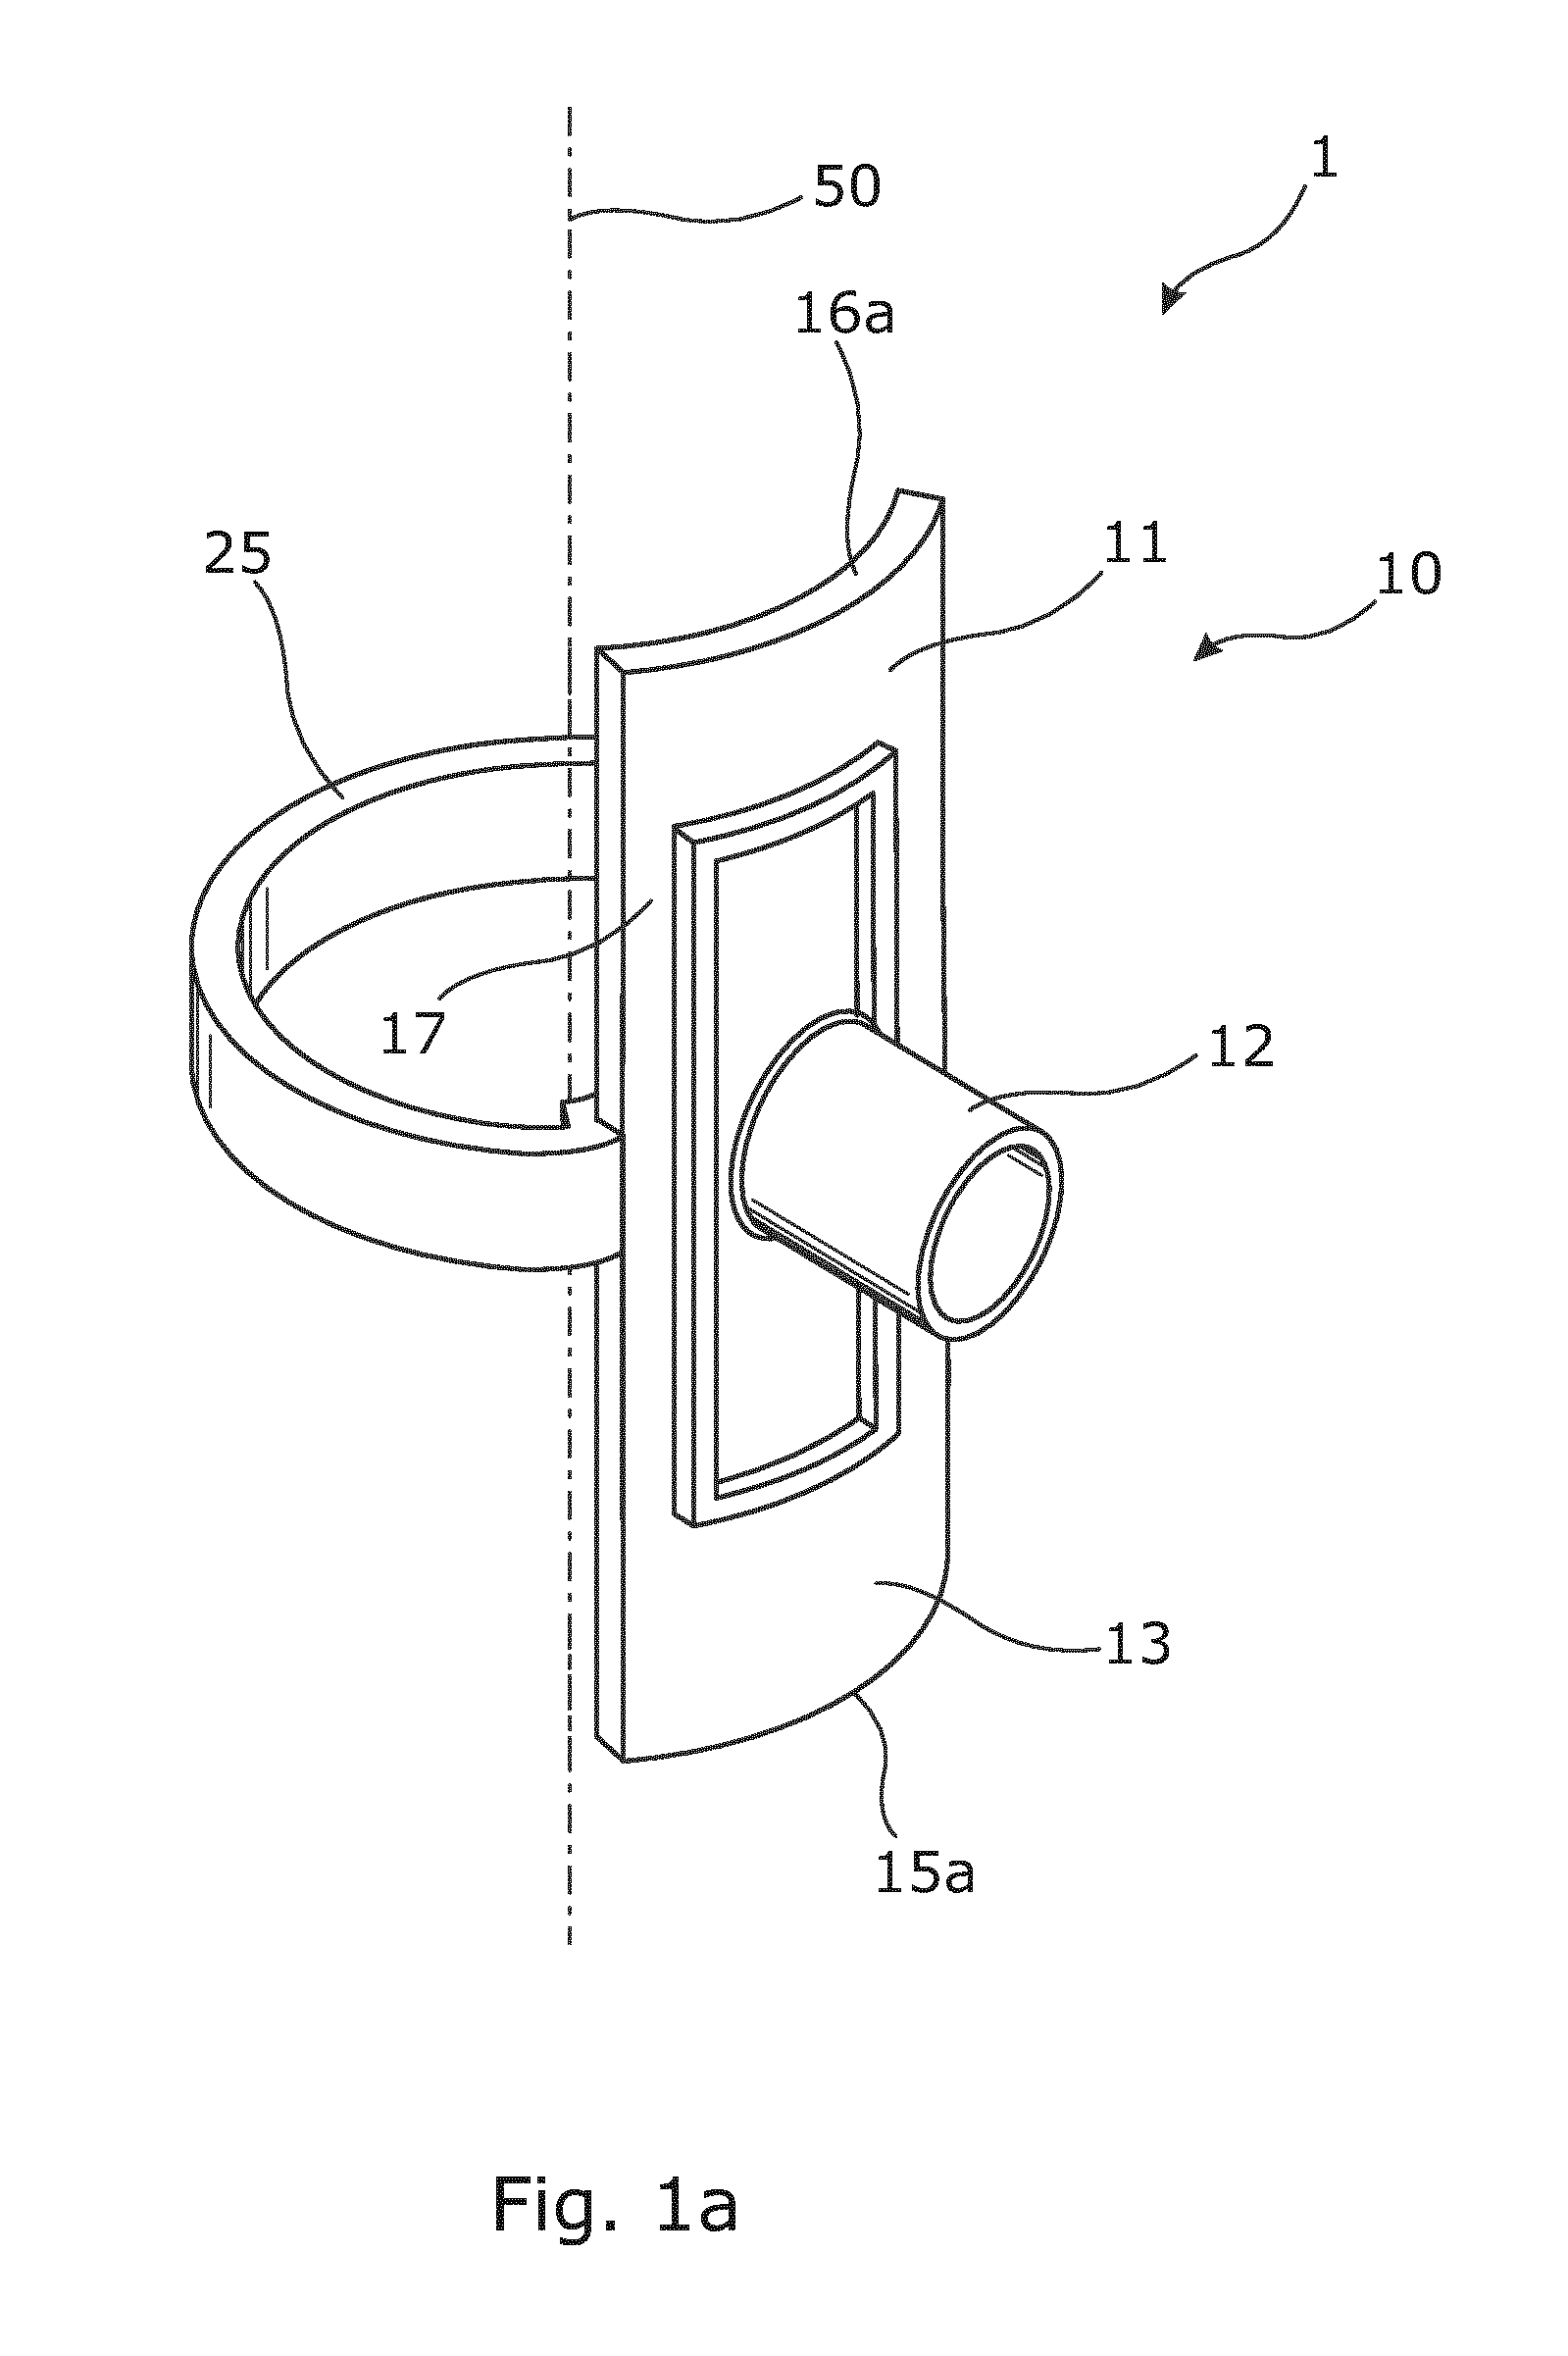 Lateral junction assembly